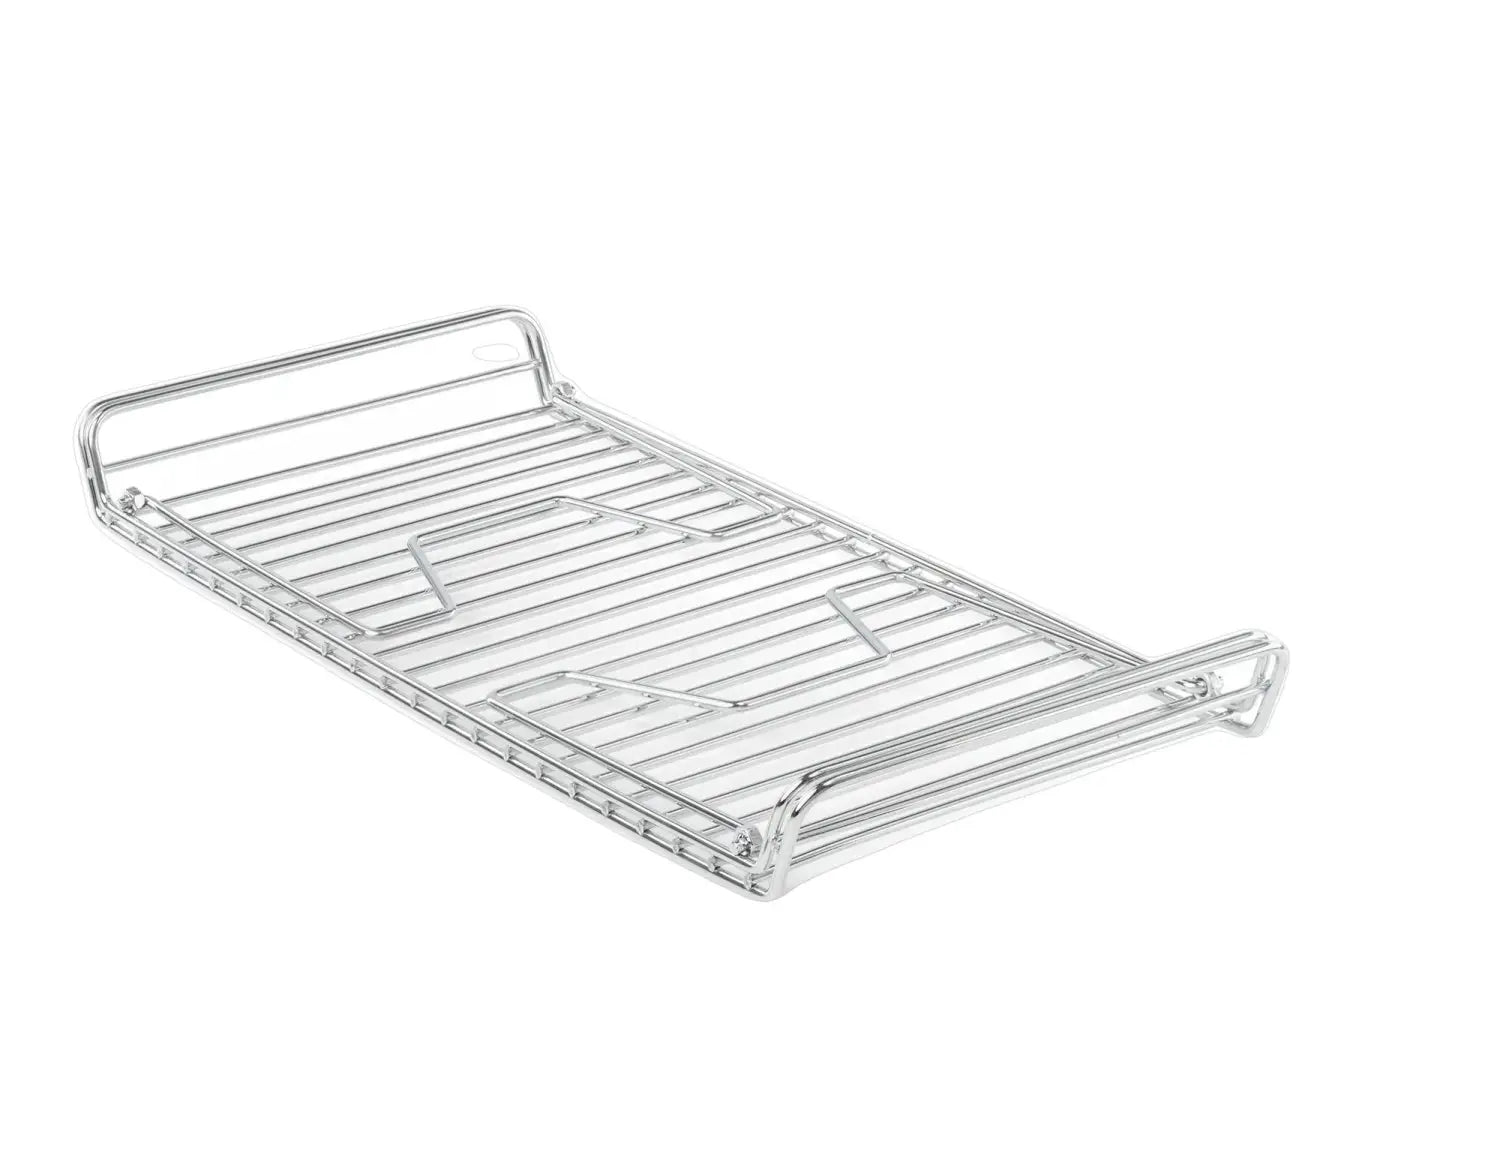 GSI Folding Campfire Grill, top view of grate folded